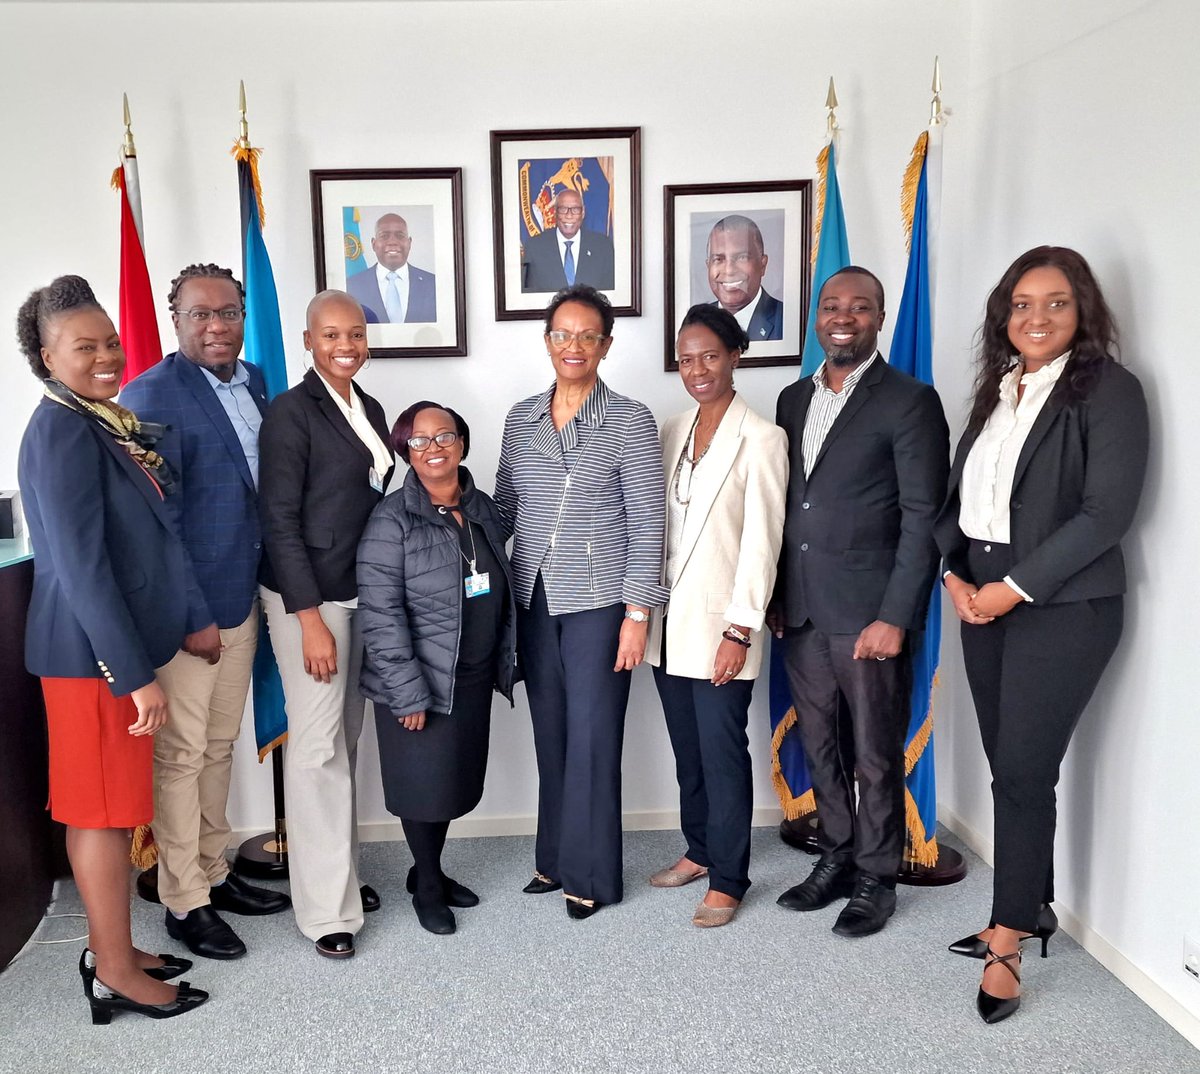 The visiting delegation of The #Bahamas 🇧🇸to the #BRSCOPs2023 visited the Permanent Mission for a fruitful exchange w/ the Ambassador & officers on matters incl. #climatechange + local efforts to soundly manage #chemicals & #waste 
#GlobalAgreements for a #HealthyPlanet